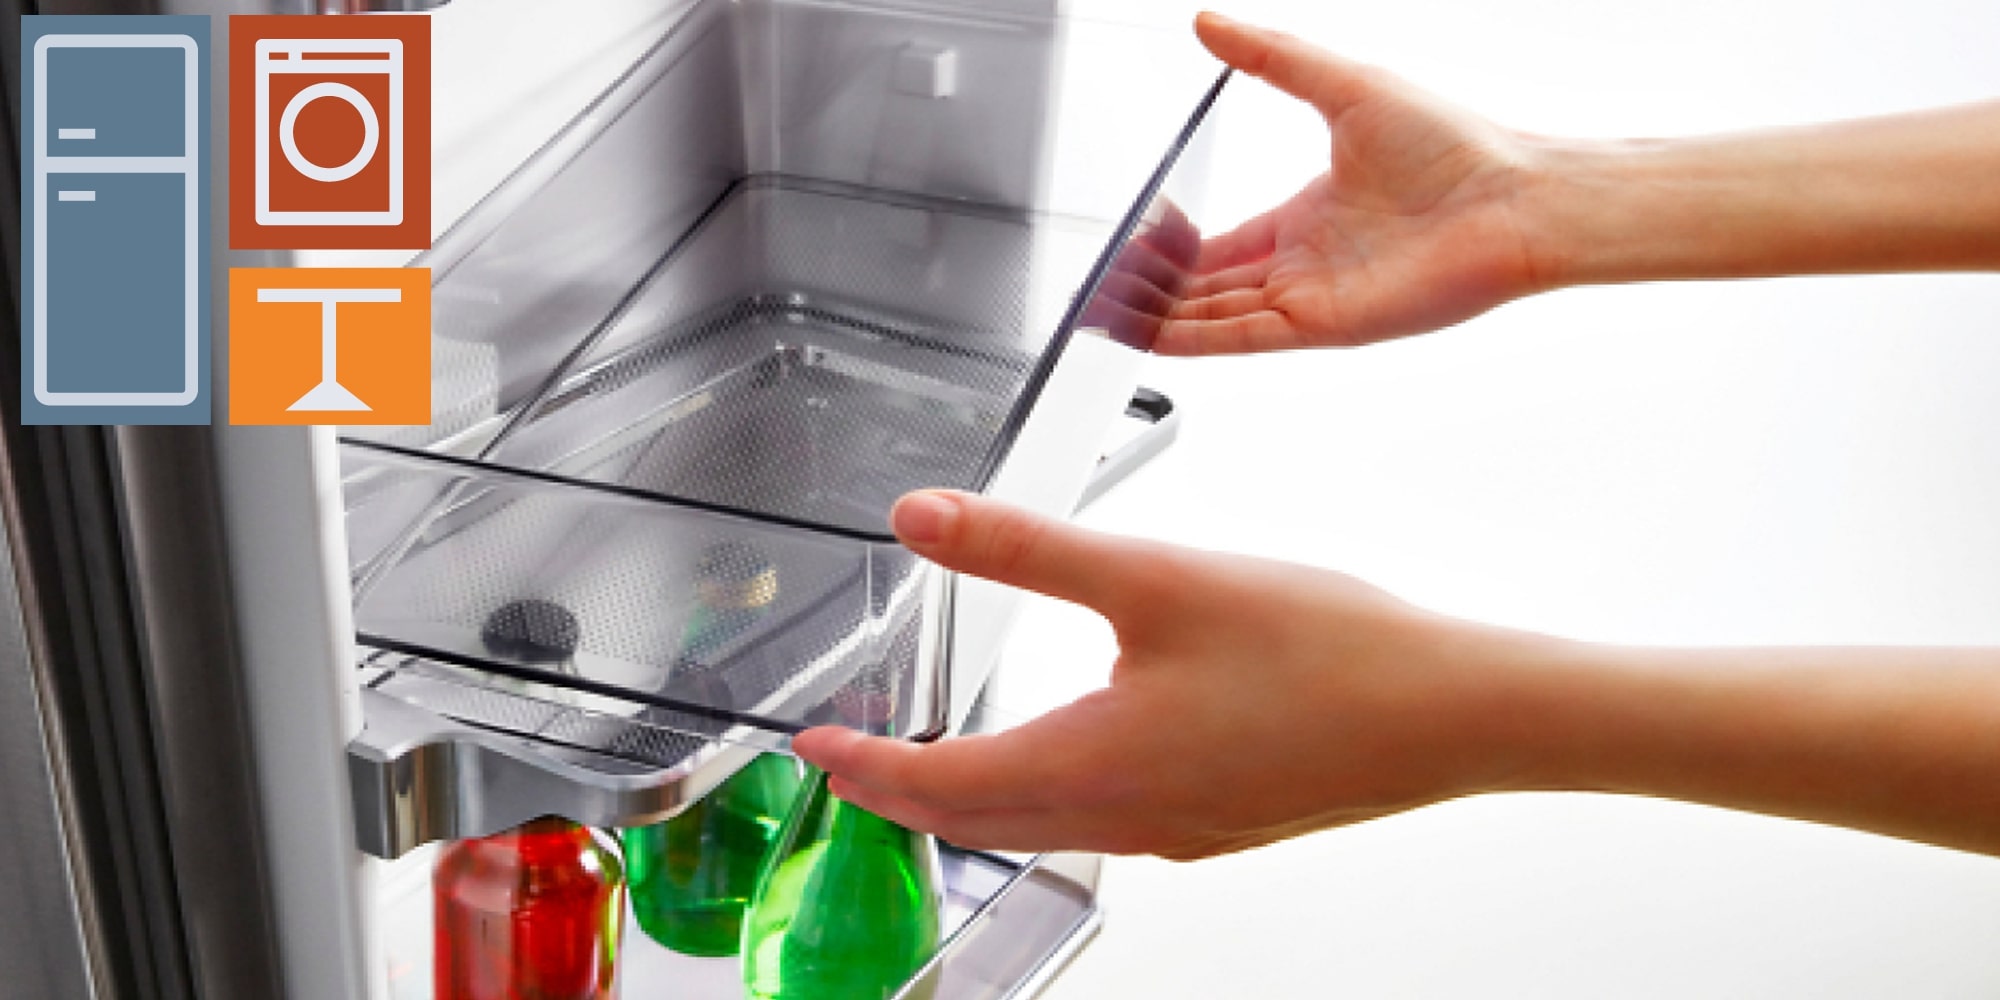 How To Remove Freezer Drawer Samsung